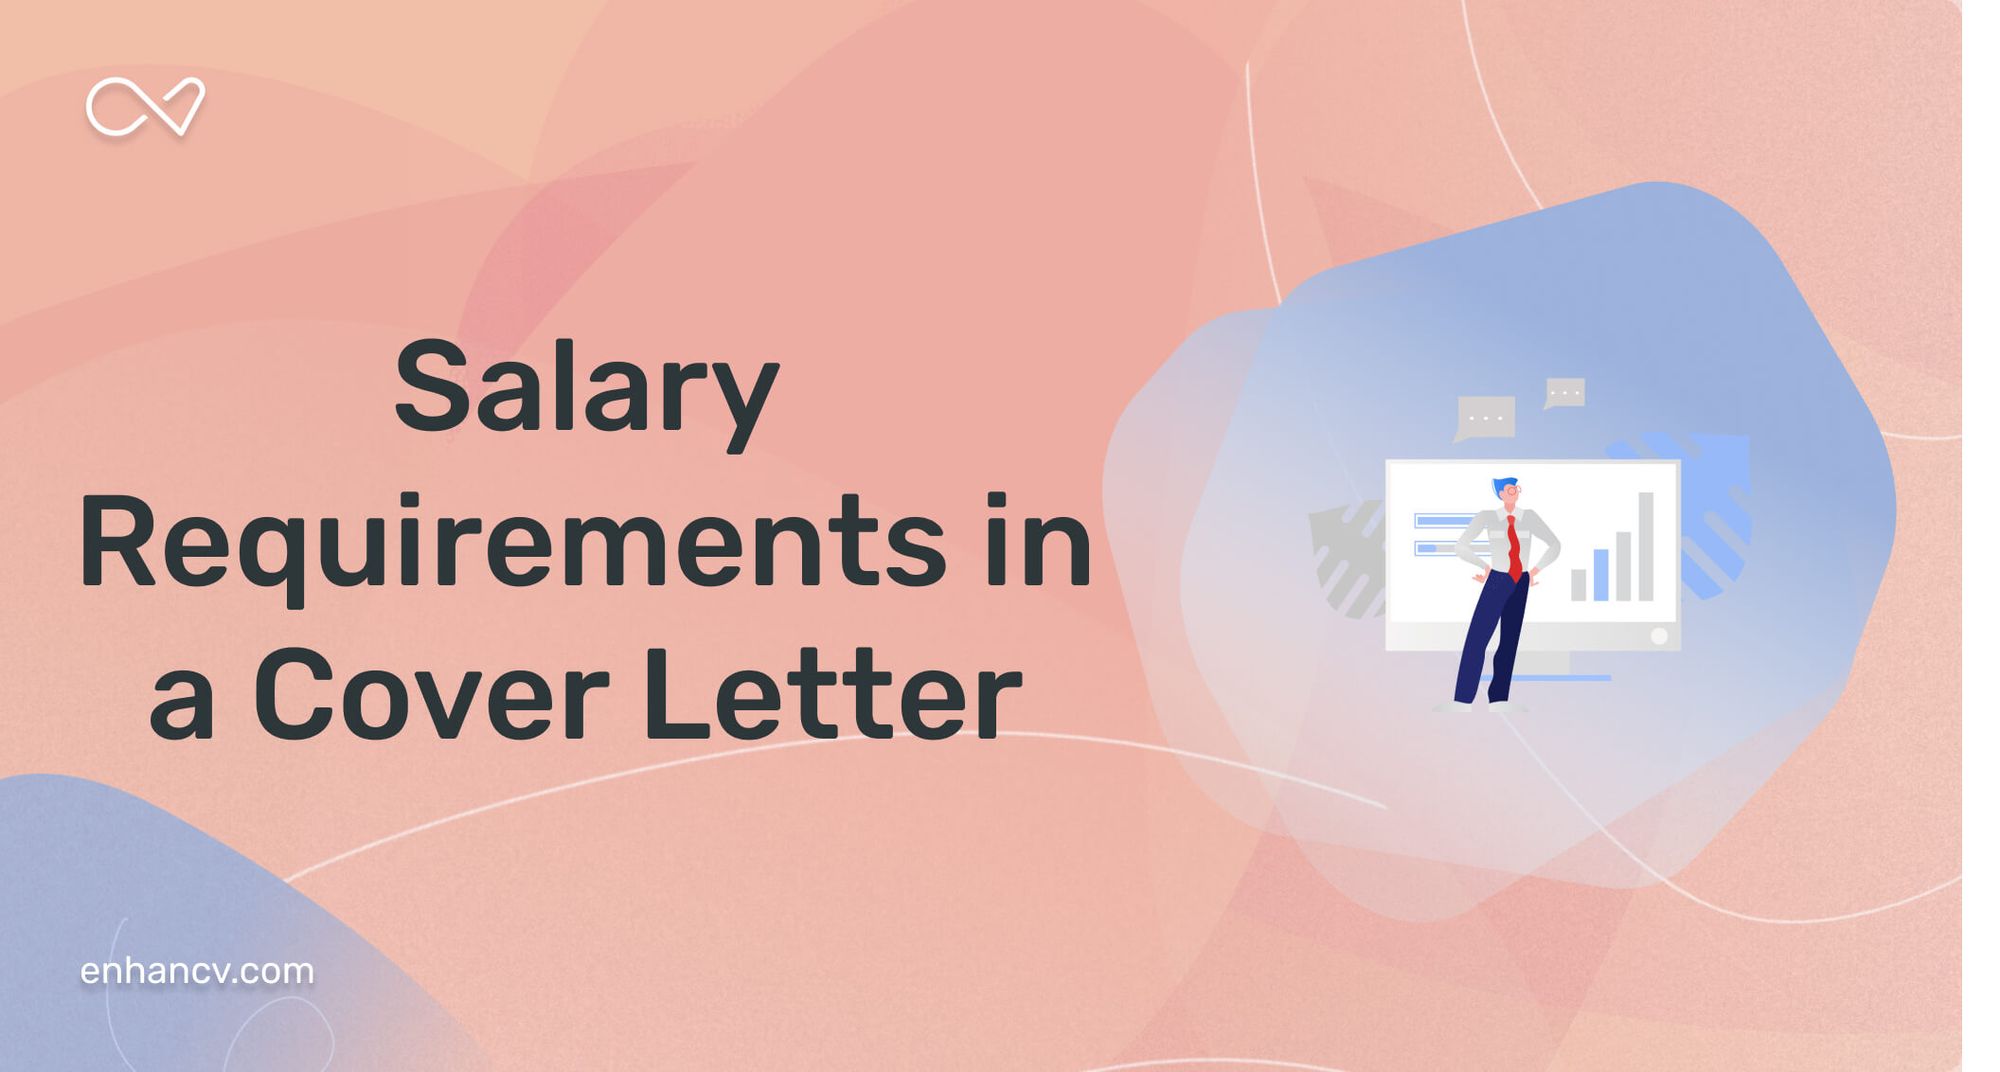 do you put salary requirements in a cover letter